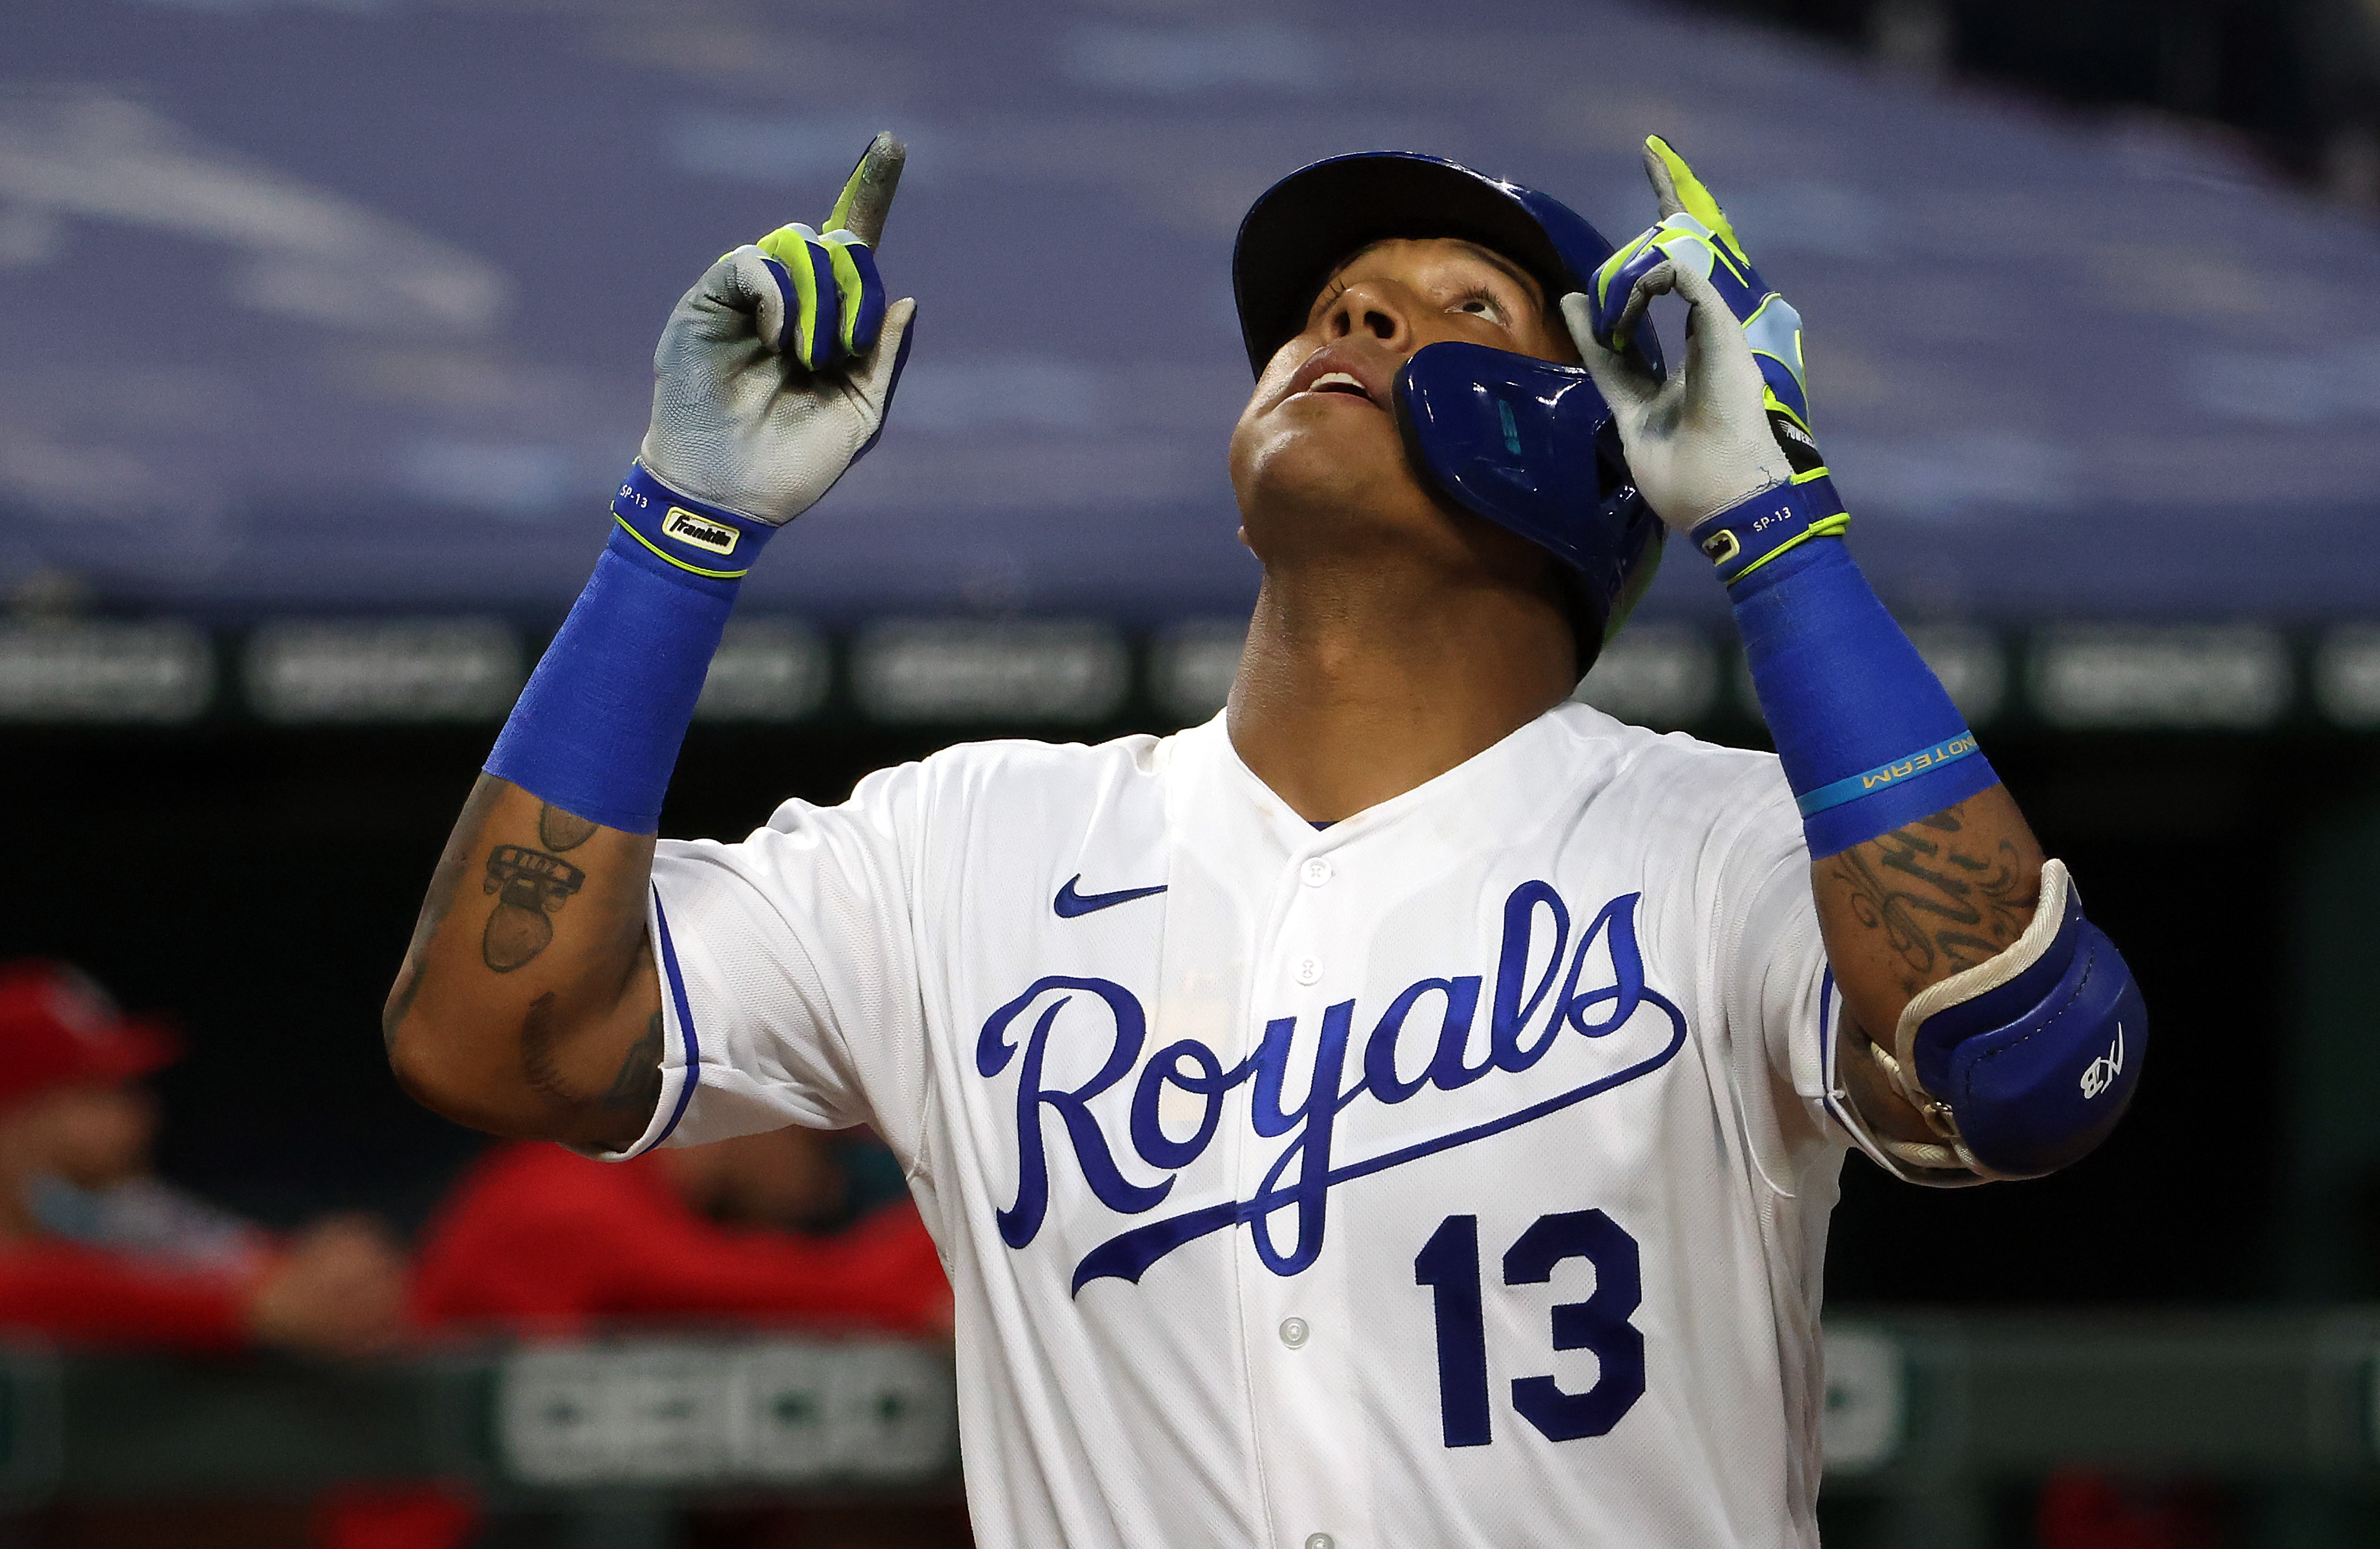 Another thousand: Royals catcher Salvador Perez plays in 000th game